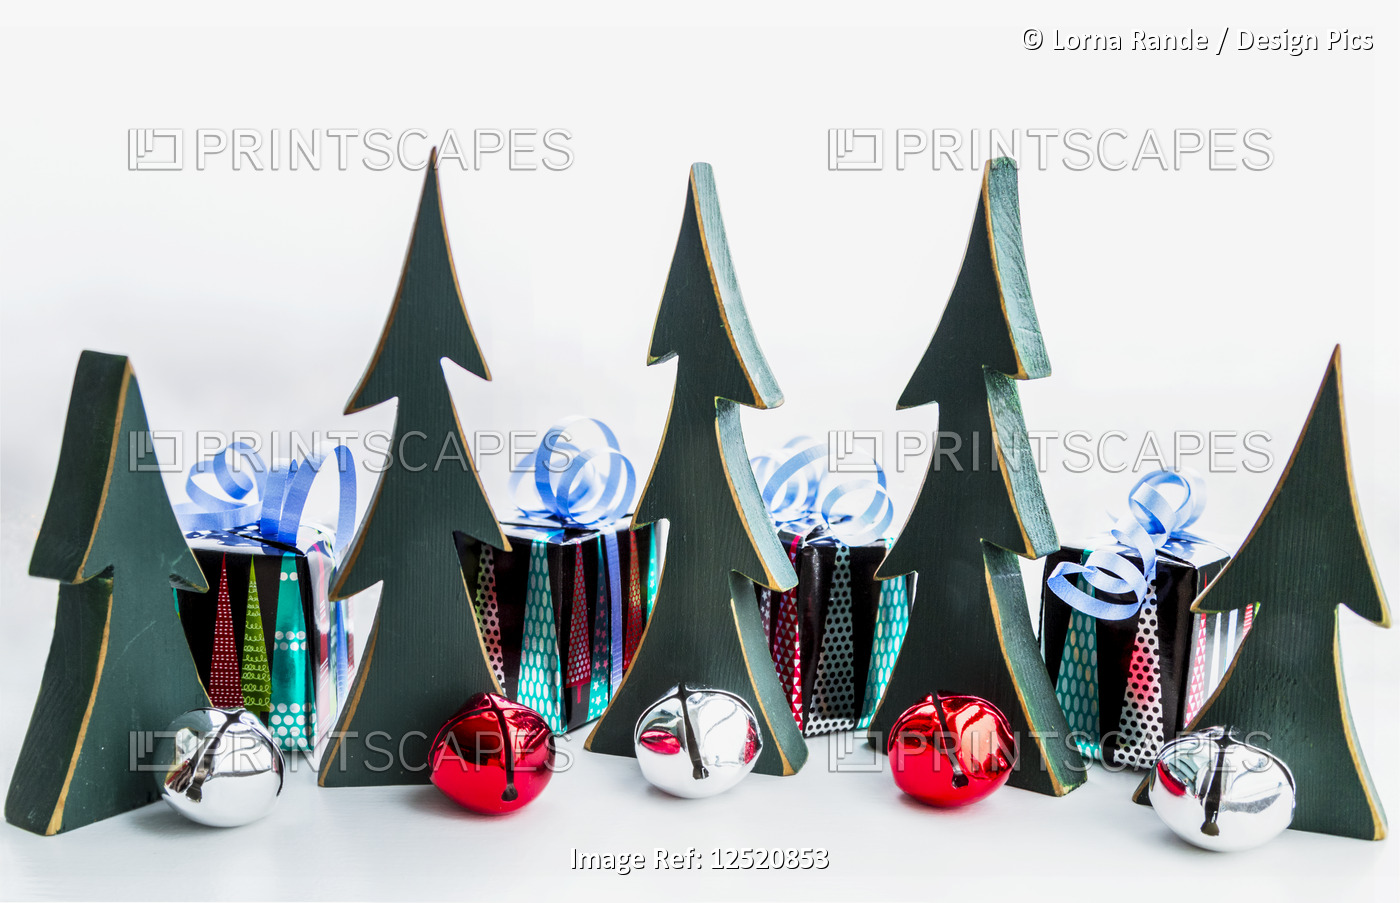 Miniature wooden trees, bells and wrapped gifts as decorations for Christmas